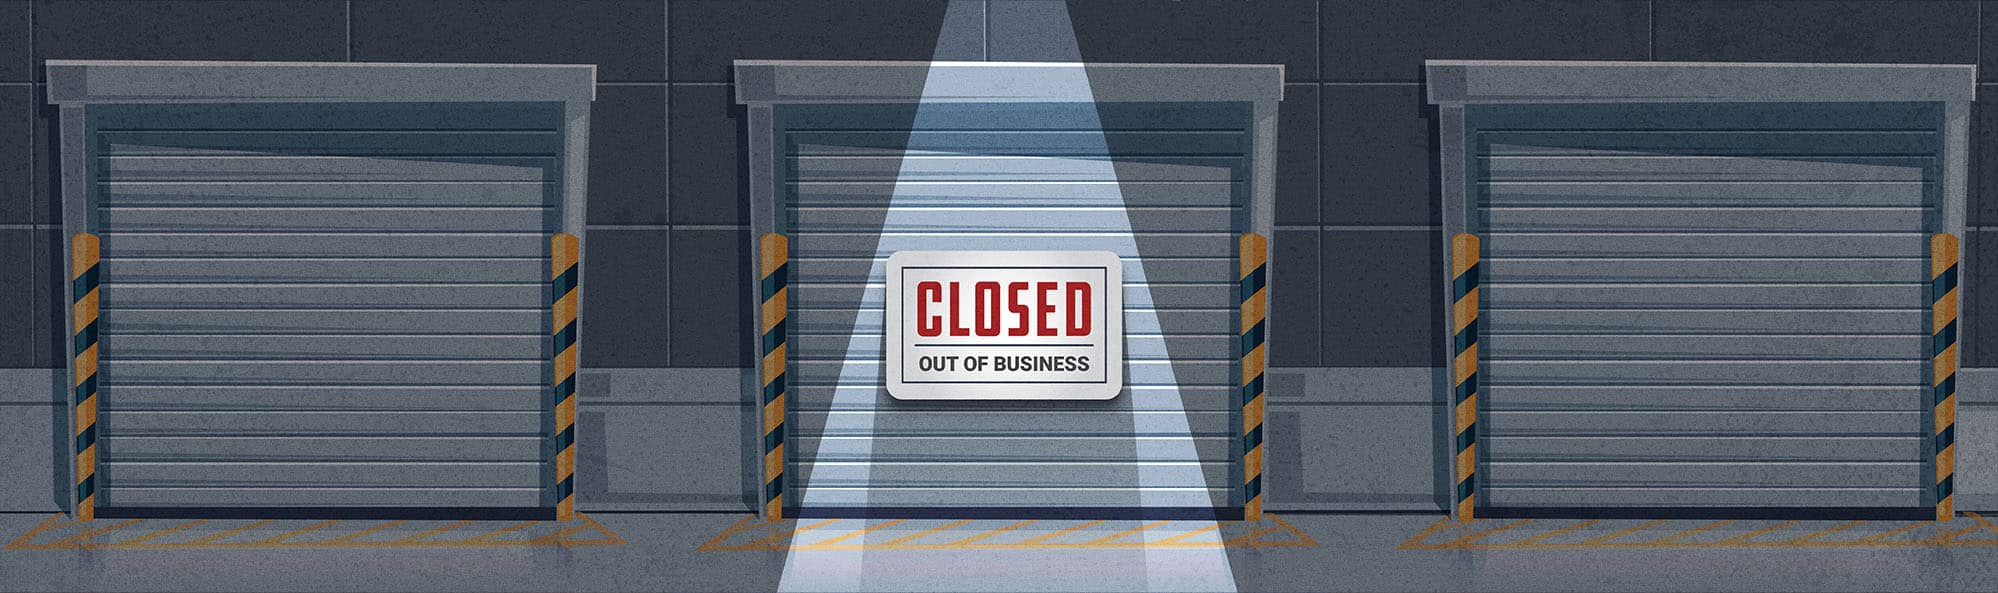 7 Ways to Put Your Shop Out of Business